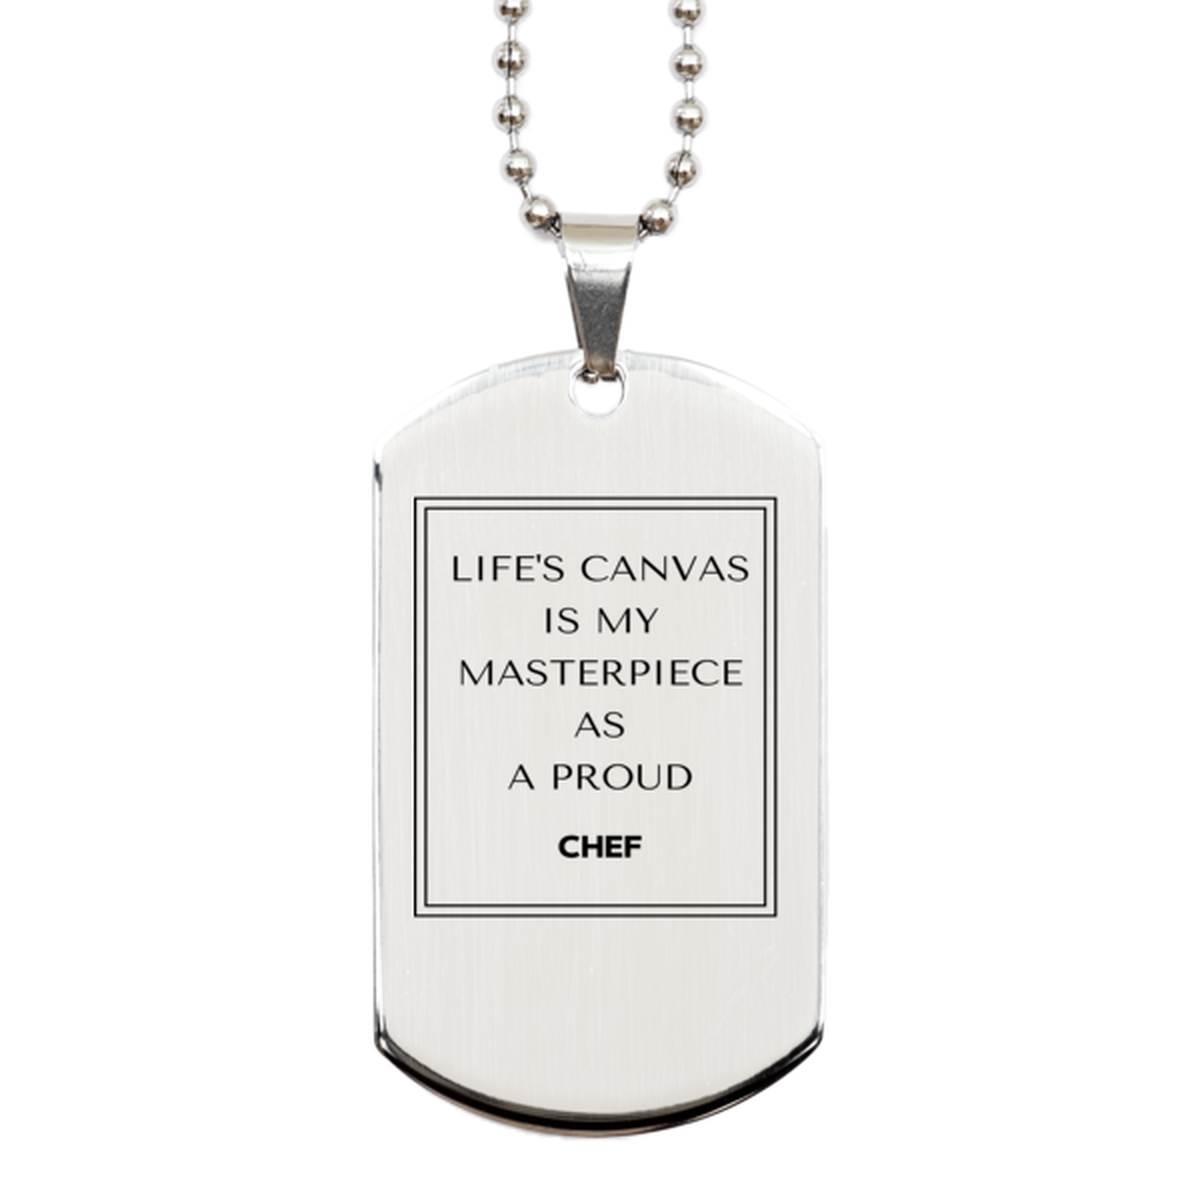 Proud Chef Gifts, Life's canvas is my masterpiece, Epic Birthday Christmas Unique Silver Dog Tag For Chef, Coworkers, Men, Women, Friends